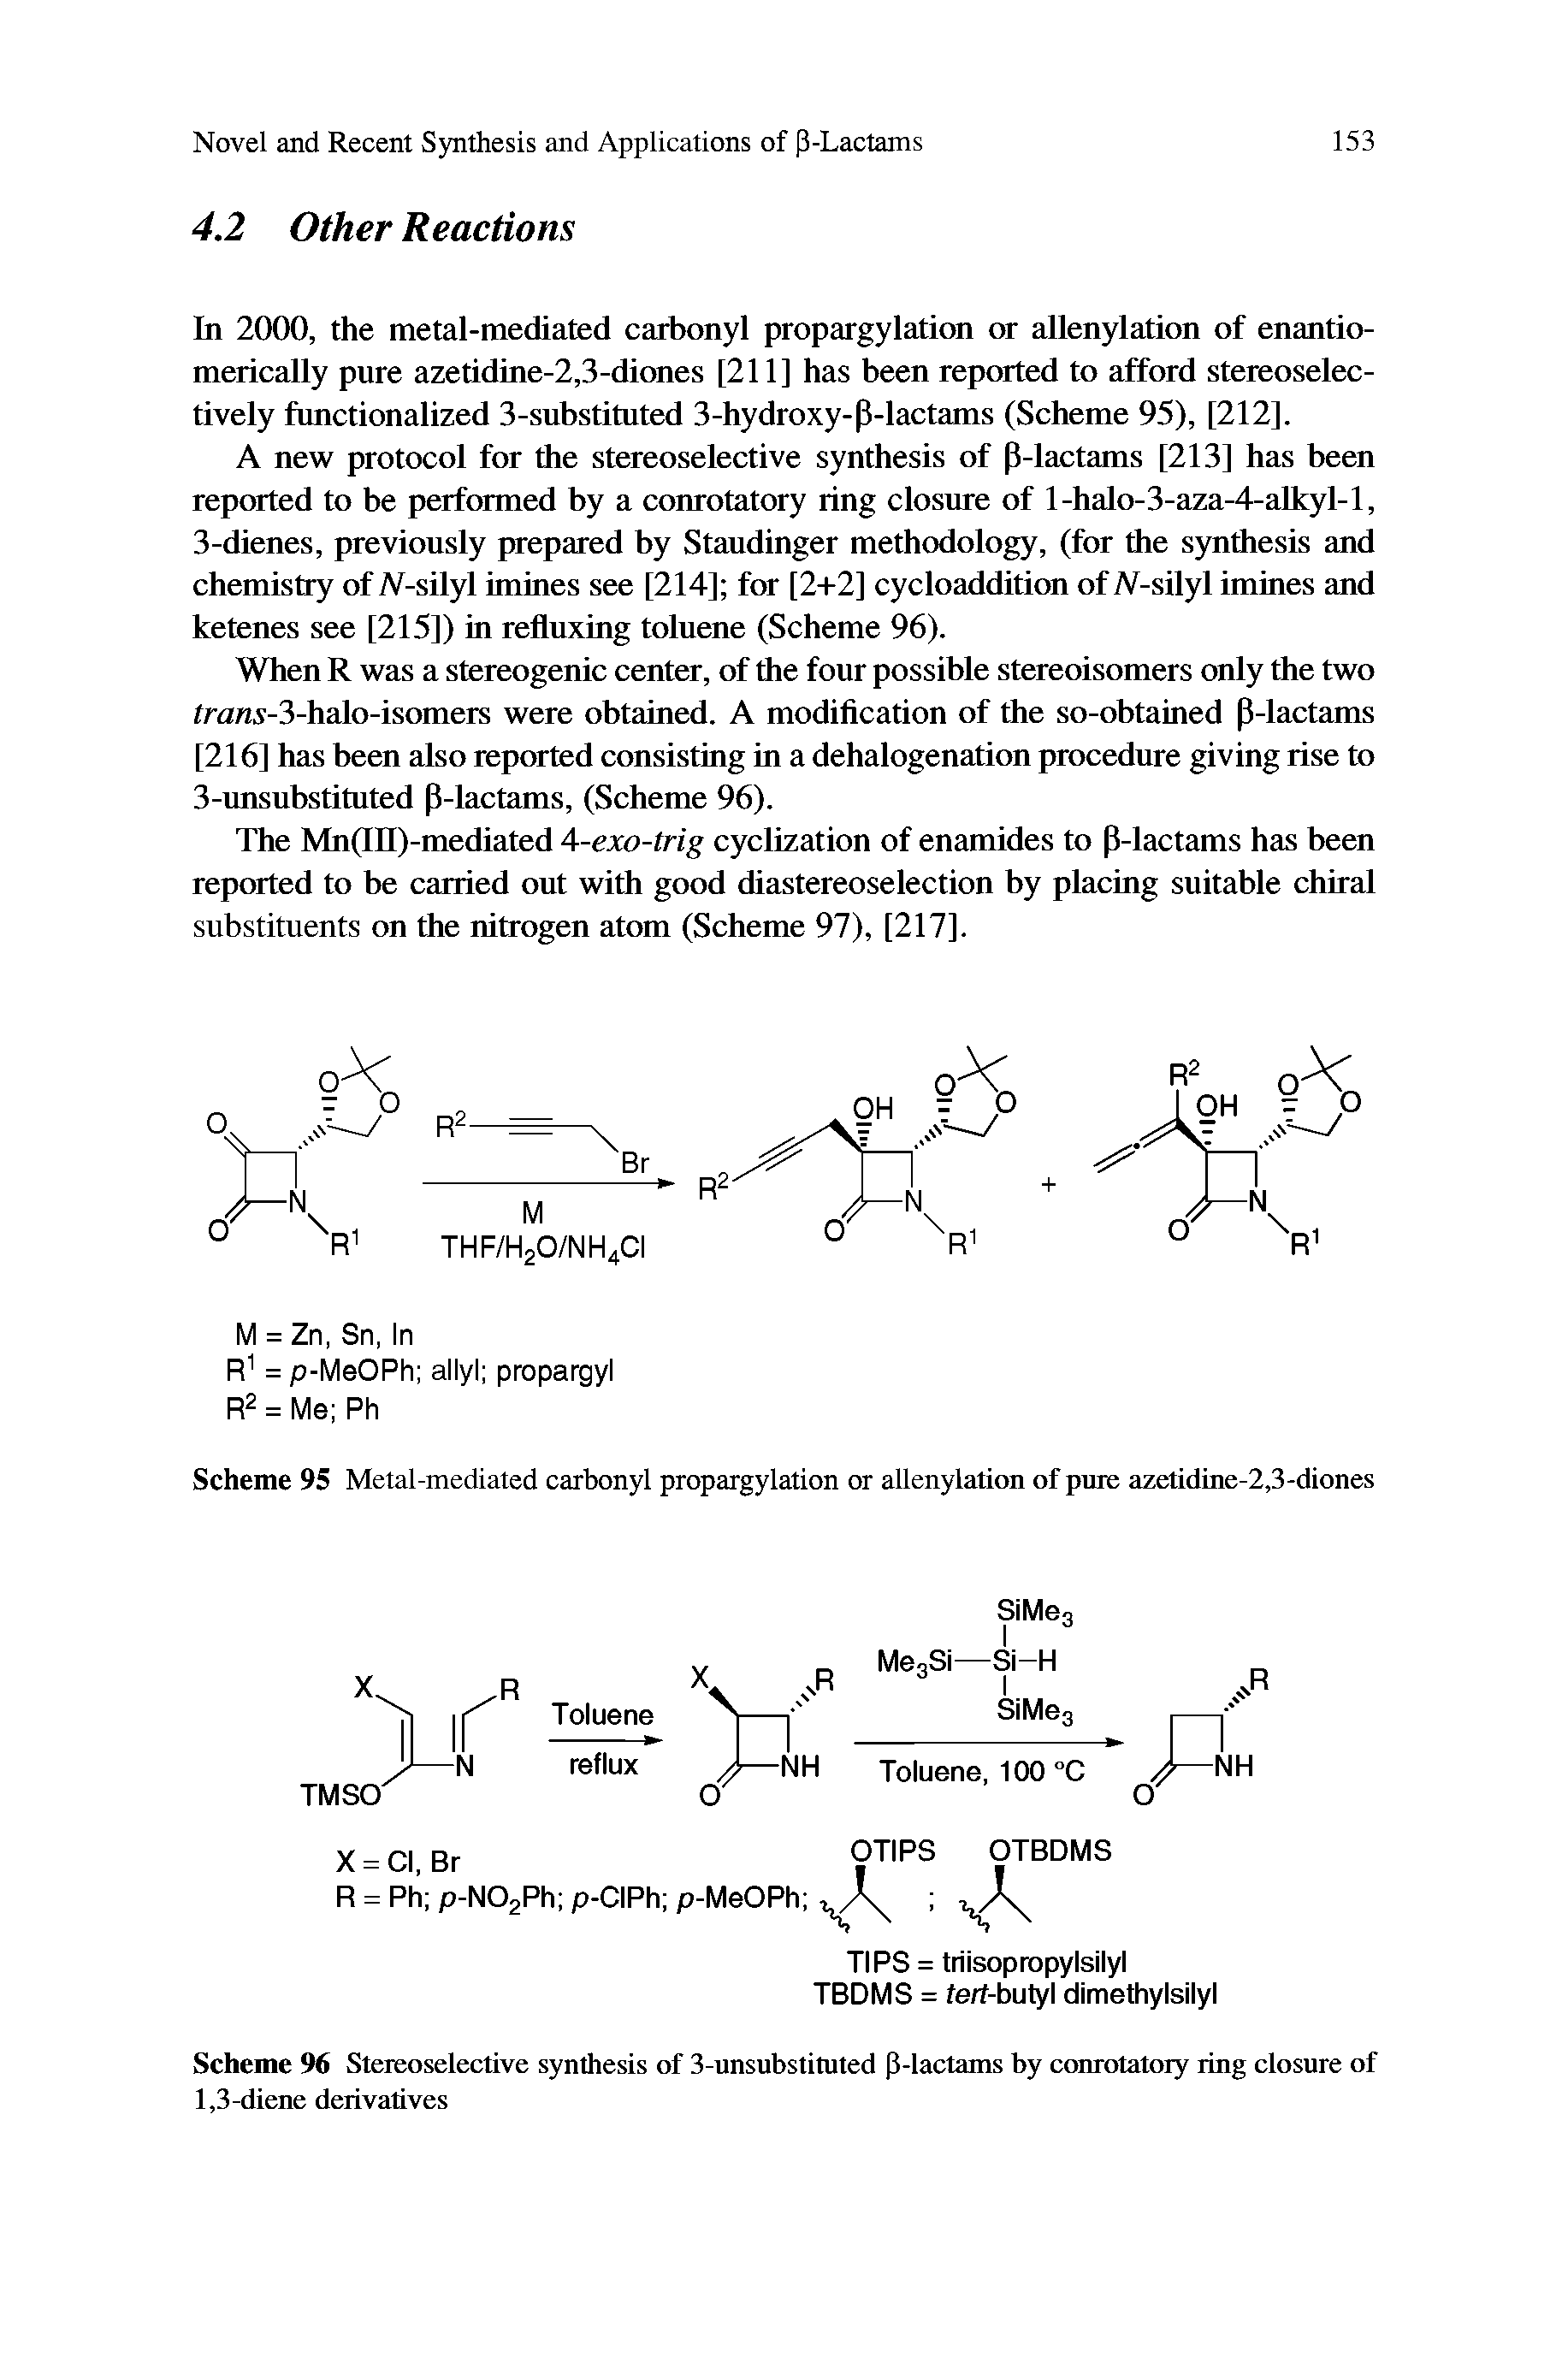 Scheme 96 Stereoselective synthesis of 3-unsubstituted P-lactams by conrotatory ring closure of 1,3-diene derivatives...